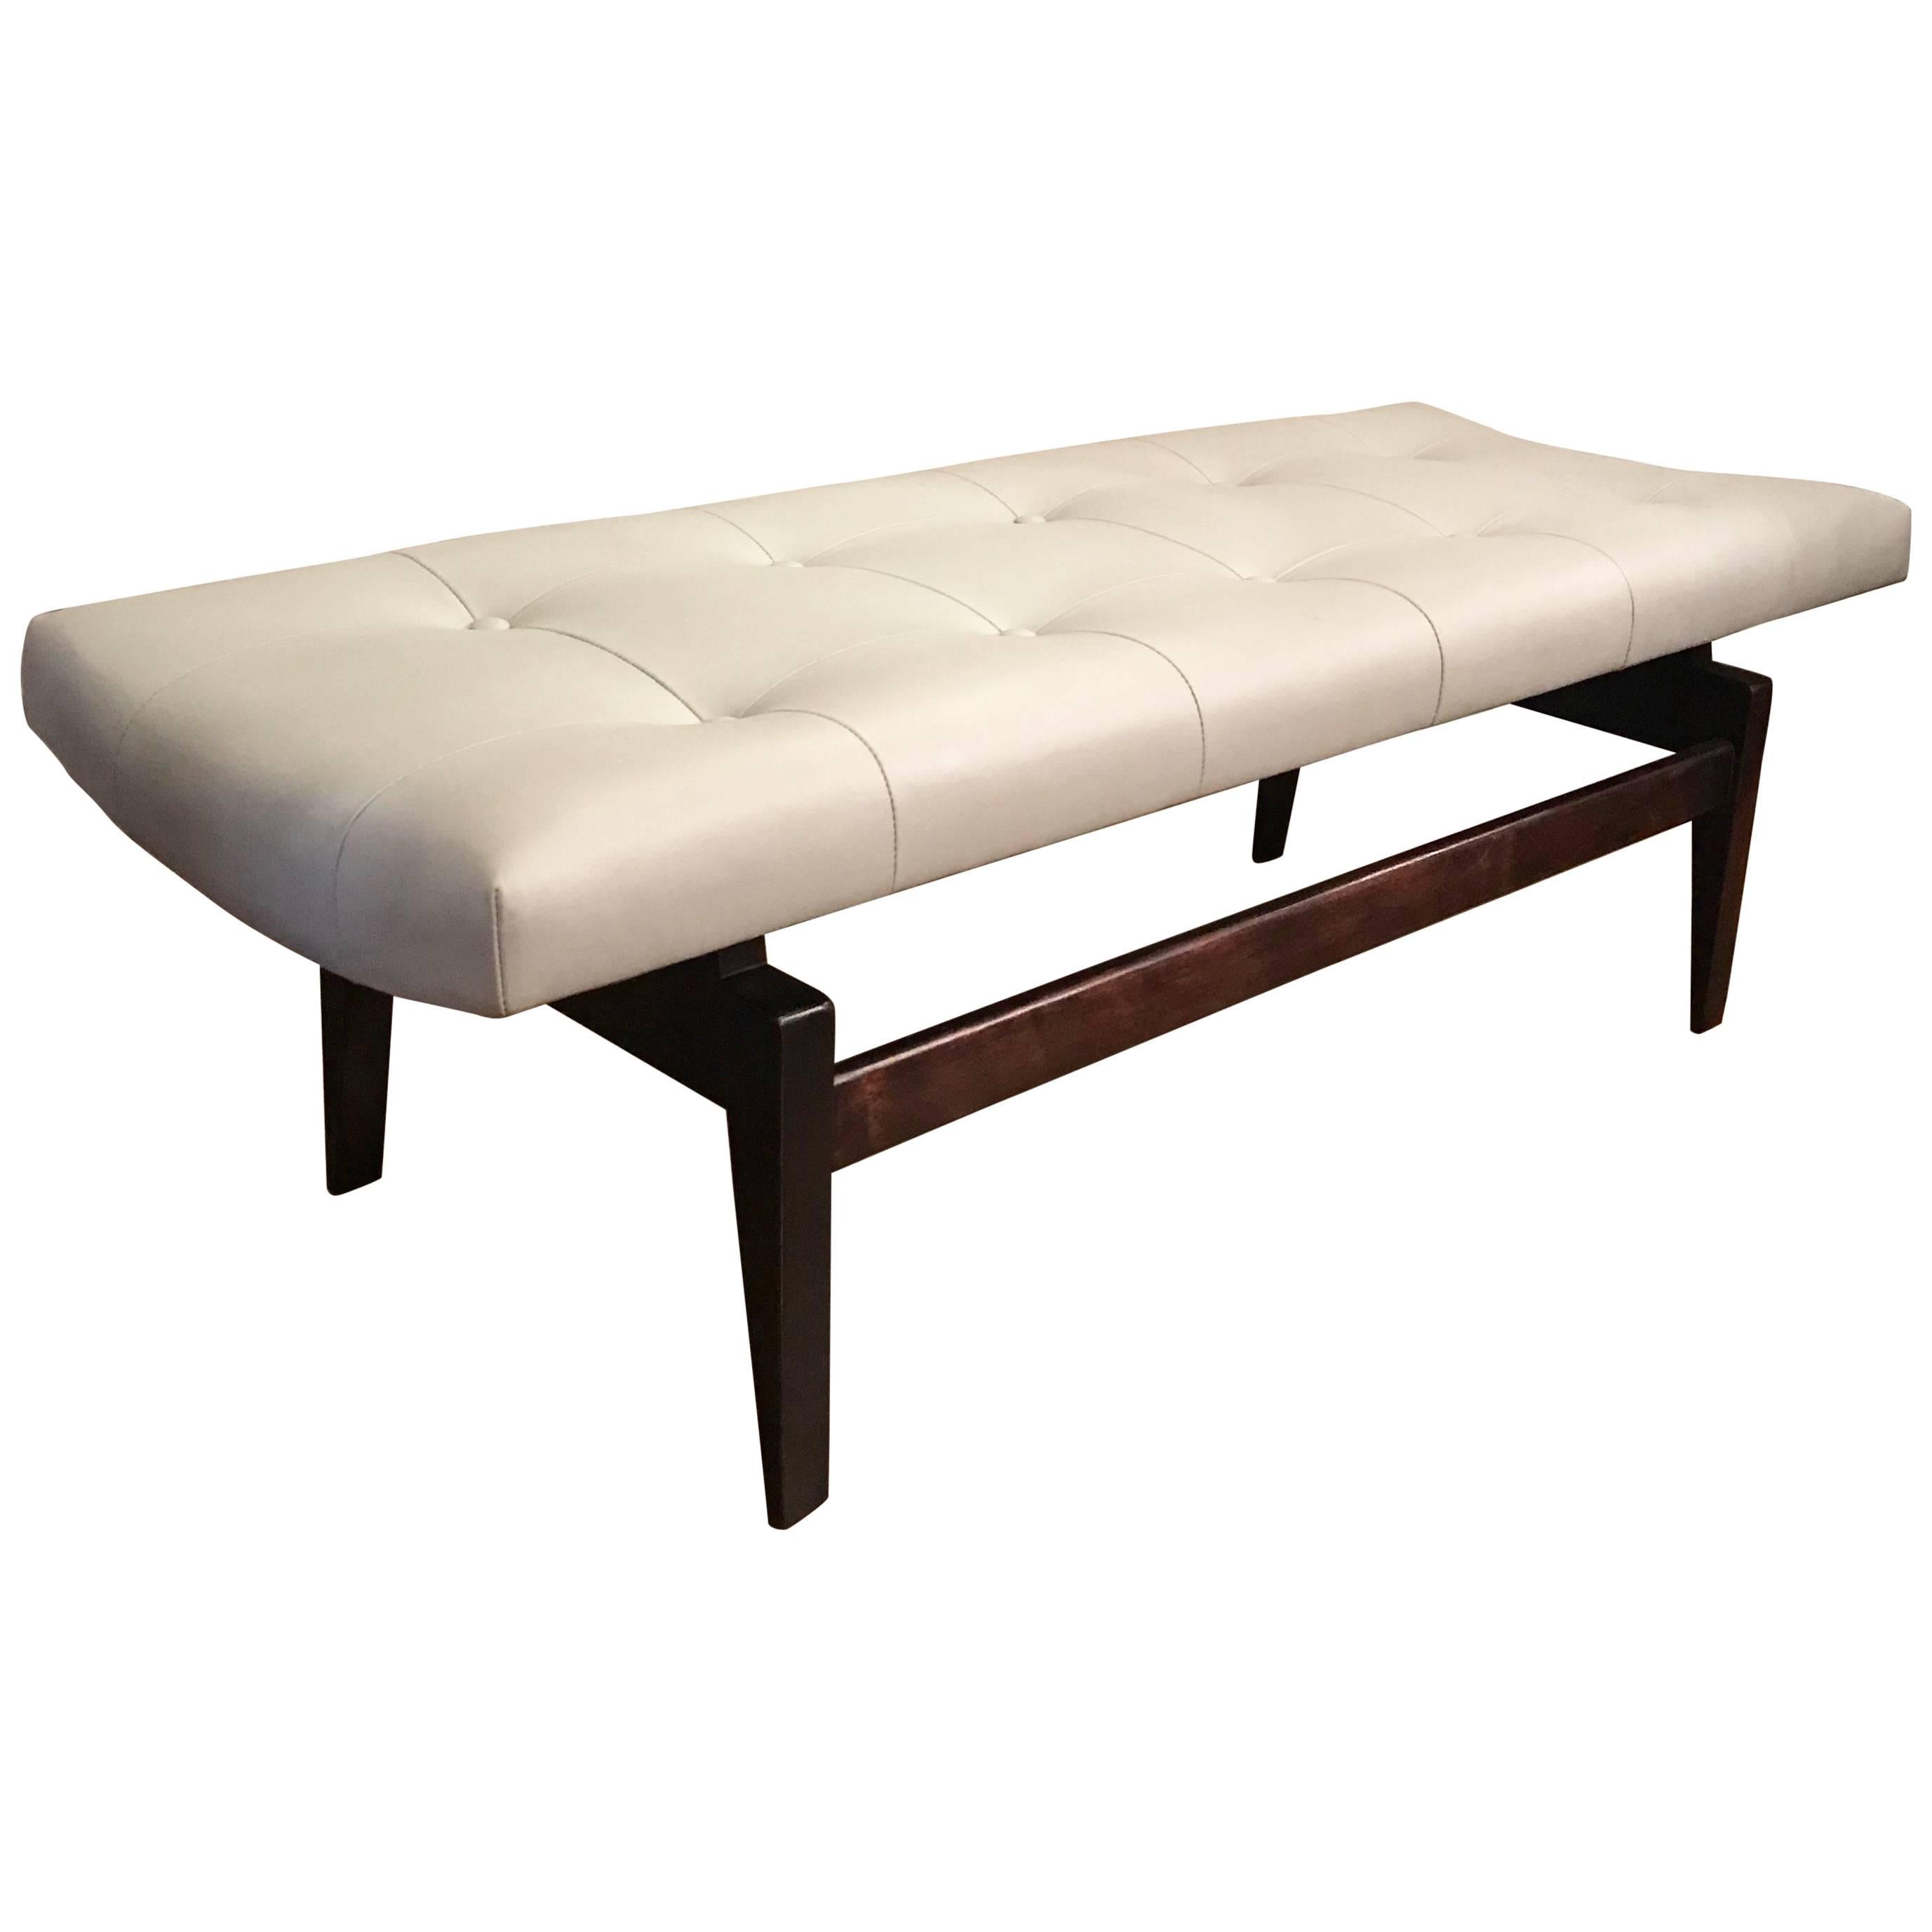 Jens Risom Floating Walnut and Leather Upholstered Bench